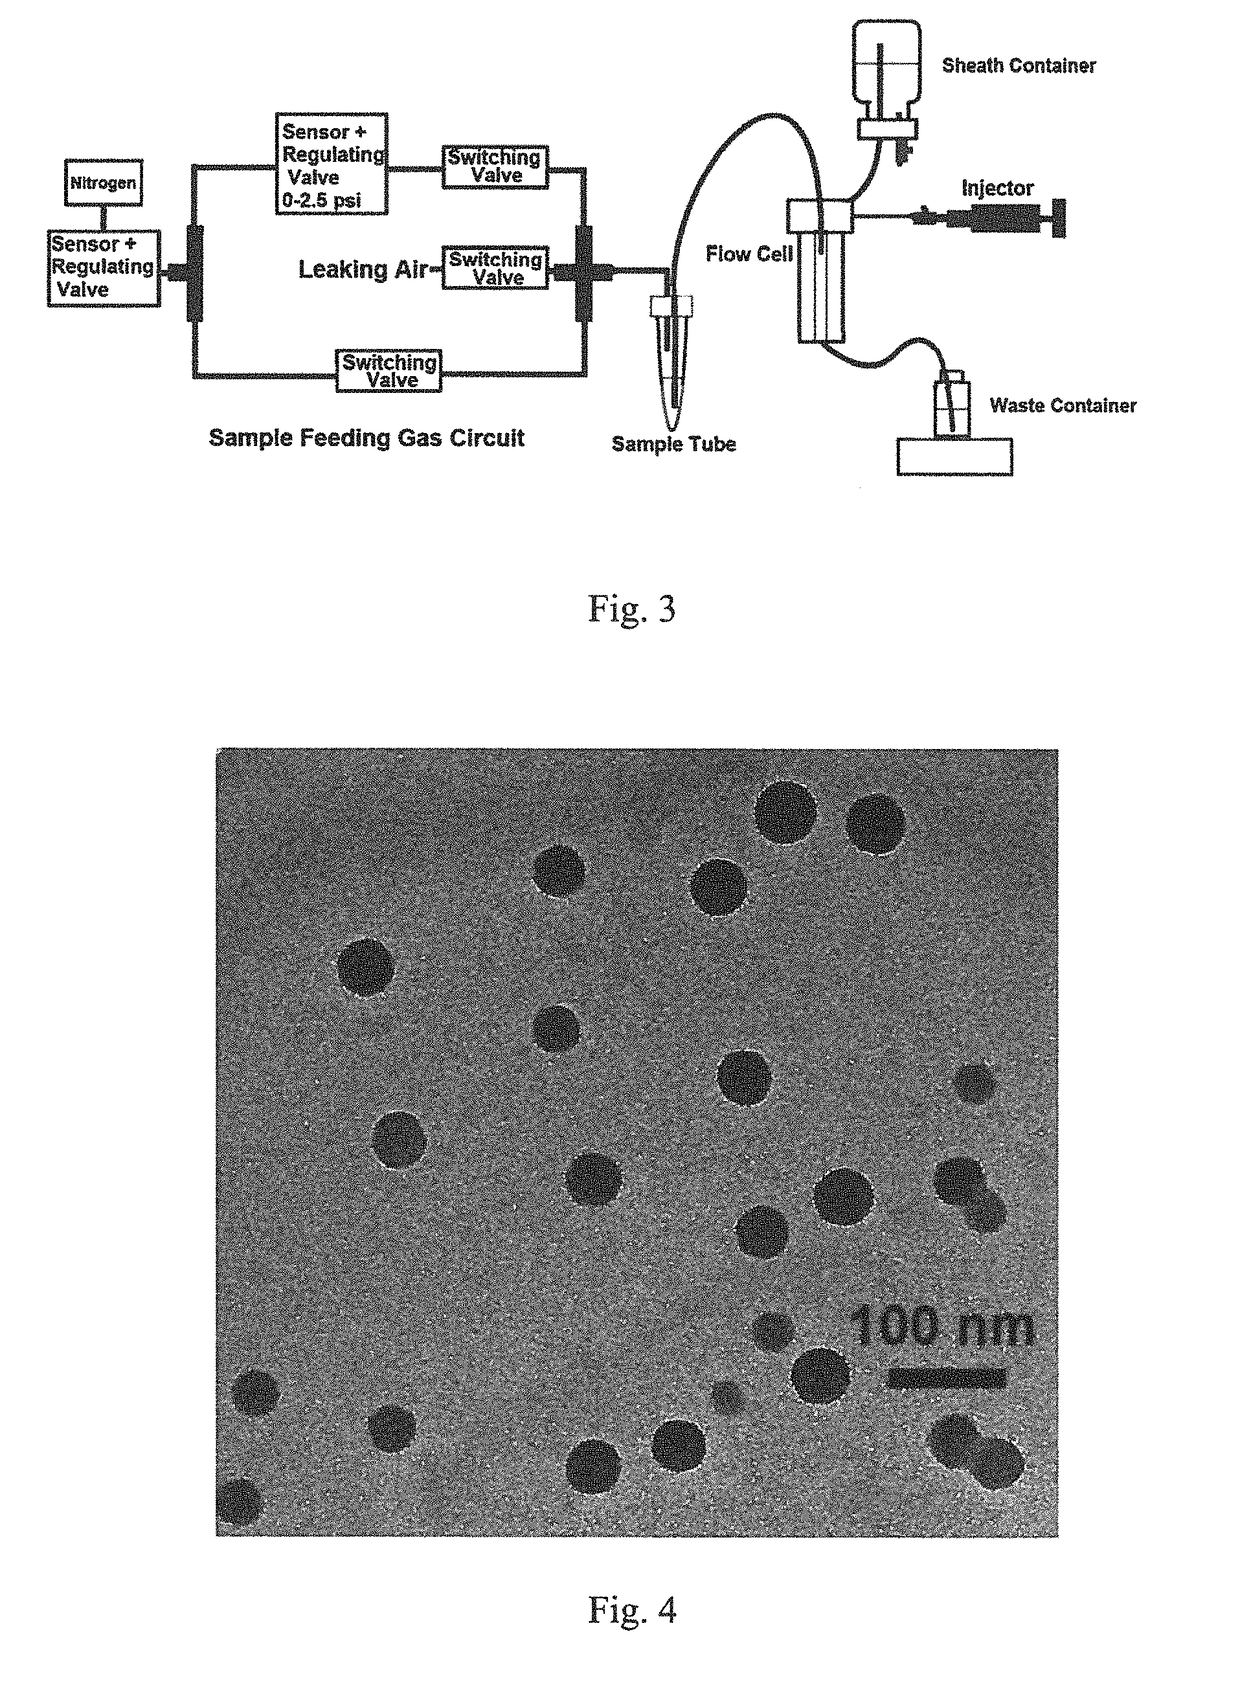 Method for detecting nano-particles using a lens imaging system with a field stop